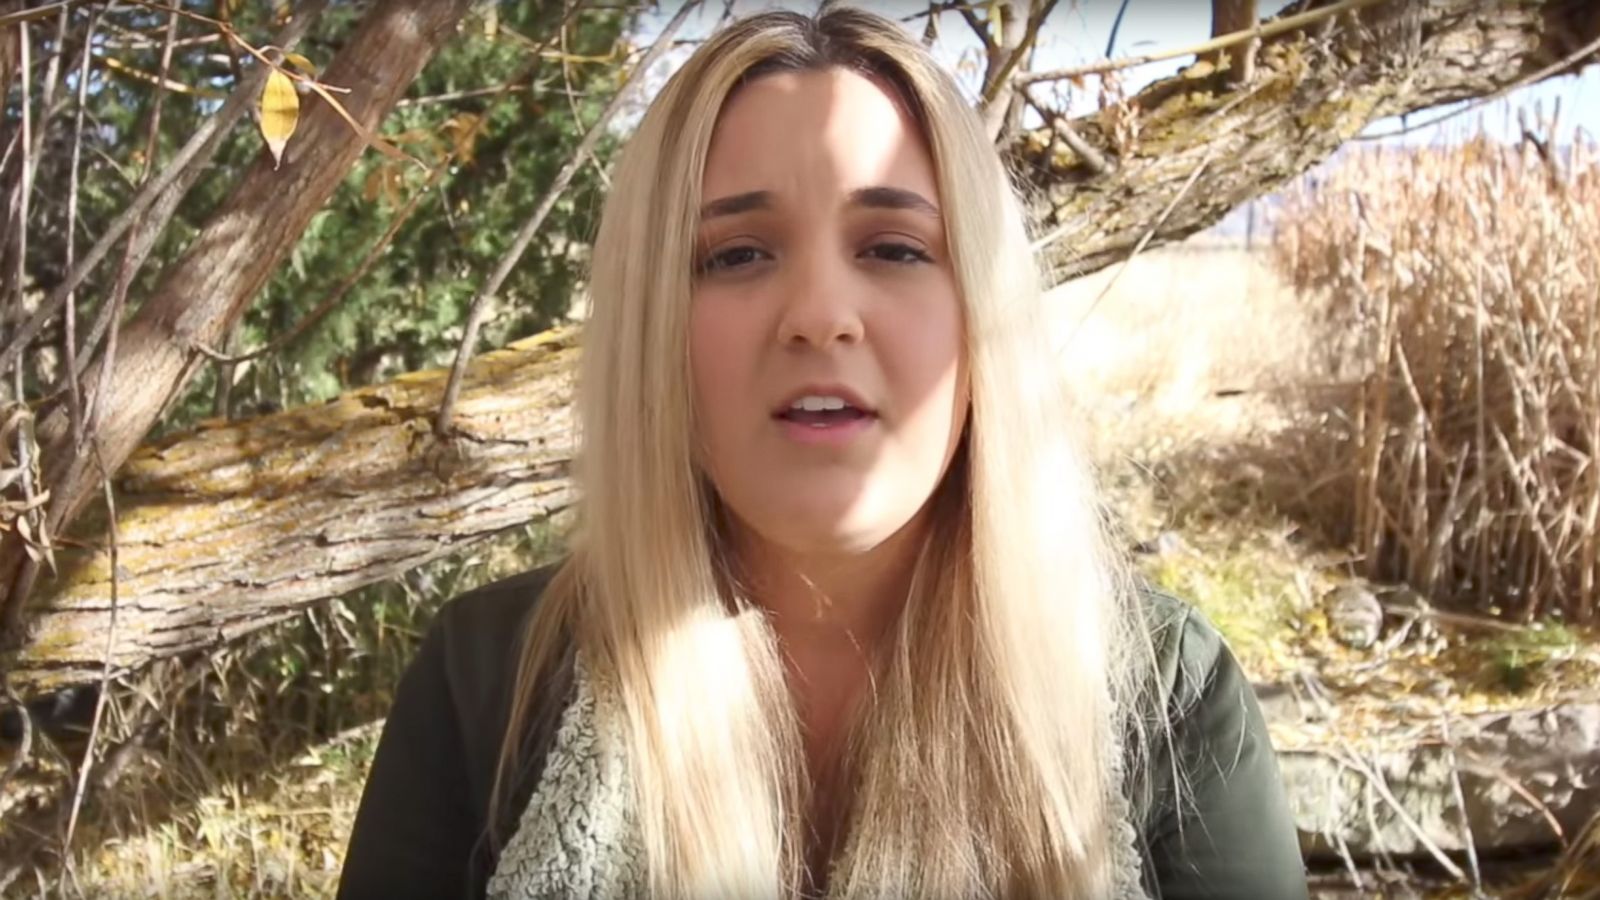 Xx Rape Video - Daughter of Apple engineer says he was fired after she posted video of  iPhone X - ABC News